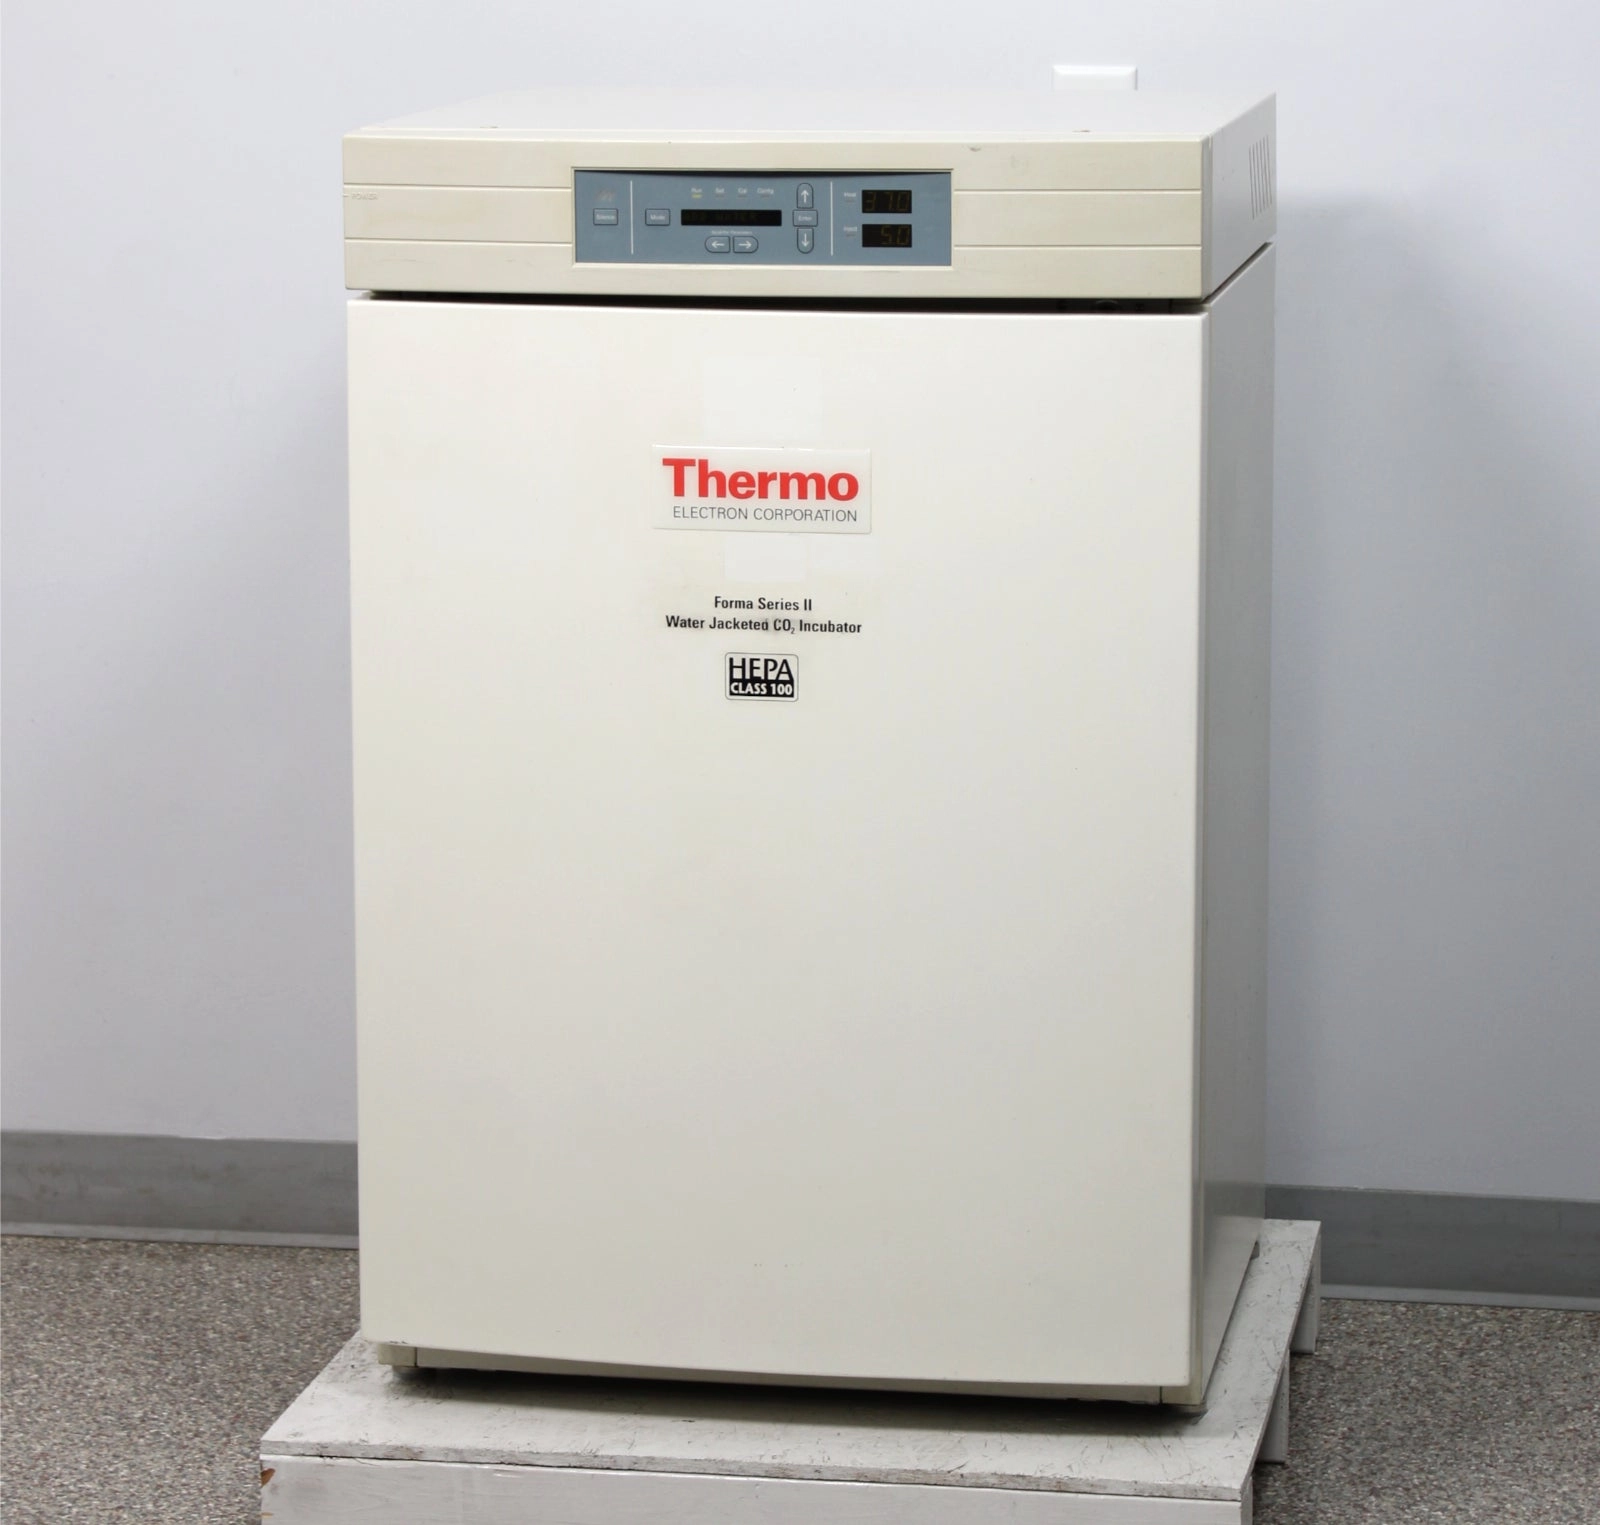 Thermo Electron 3110 Forma Series II Water Jacketed CO2 Incubator w/ 4 Shelves